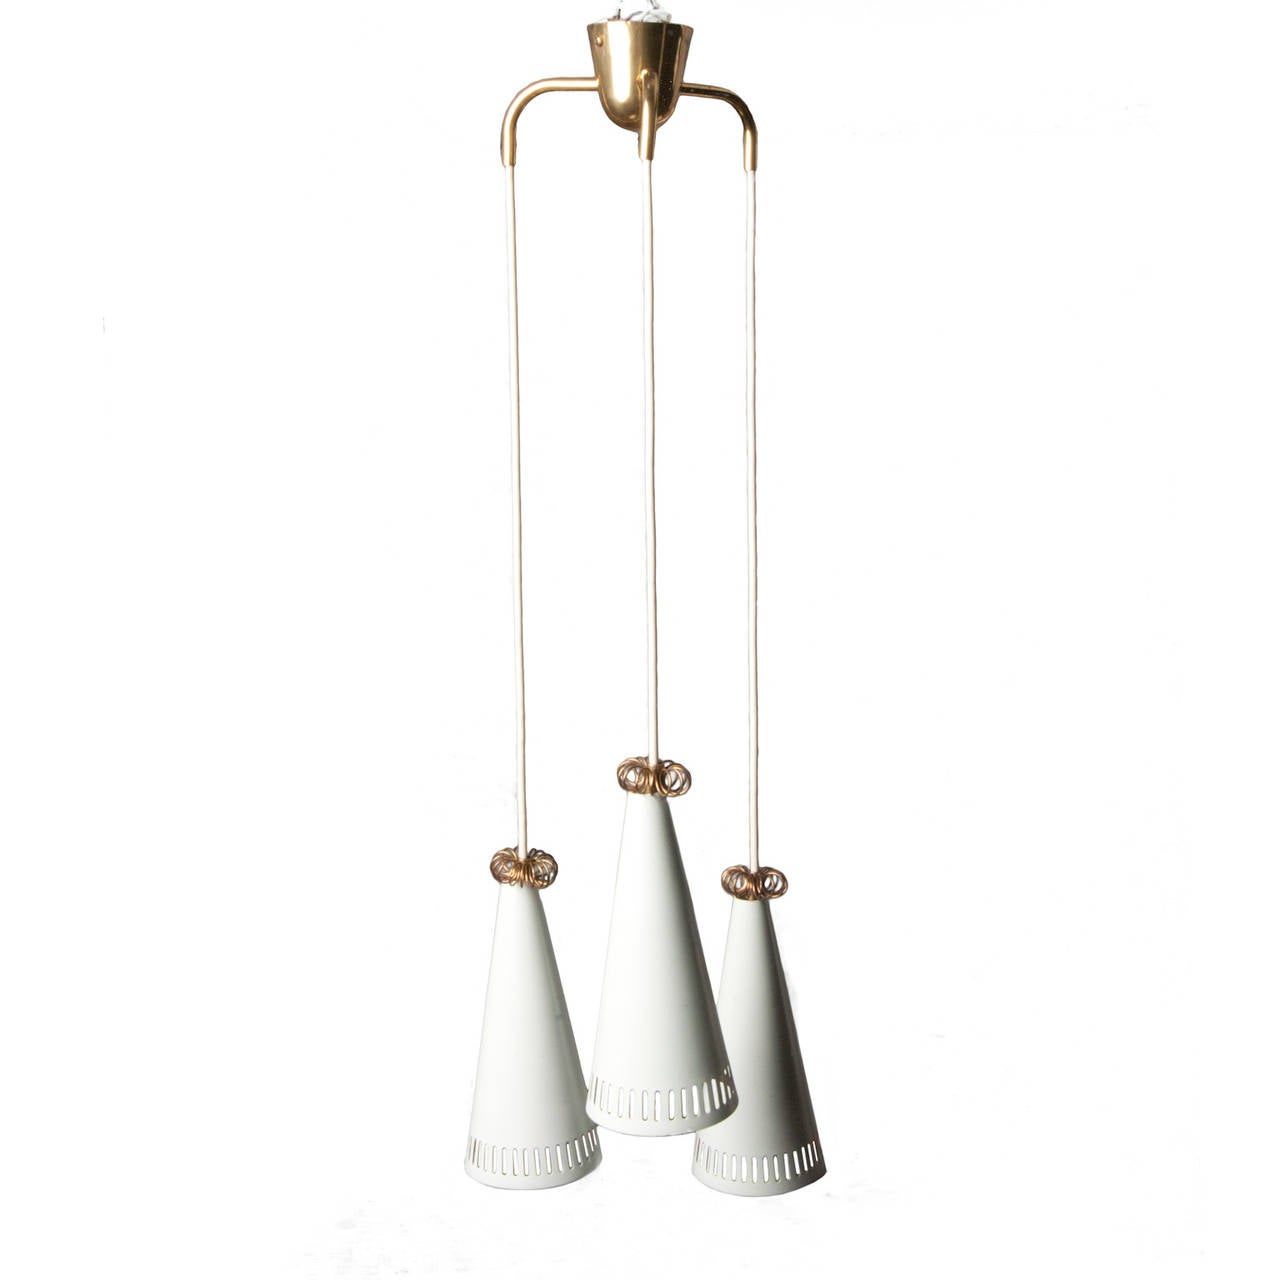 A three-pendant chandelier of brass and white enamel. Shades have a slotted metal detail and are topped with a curled brass ring.